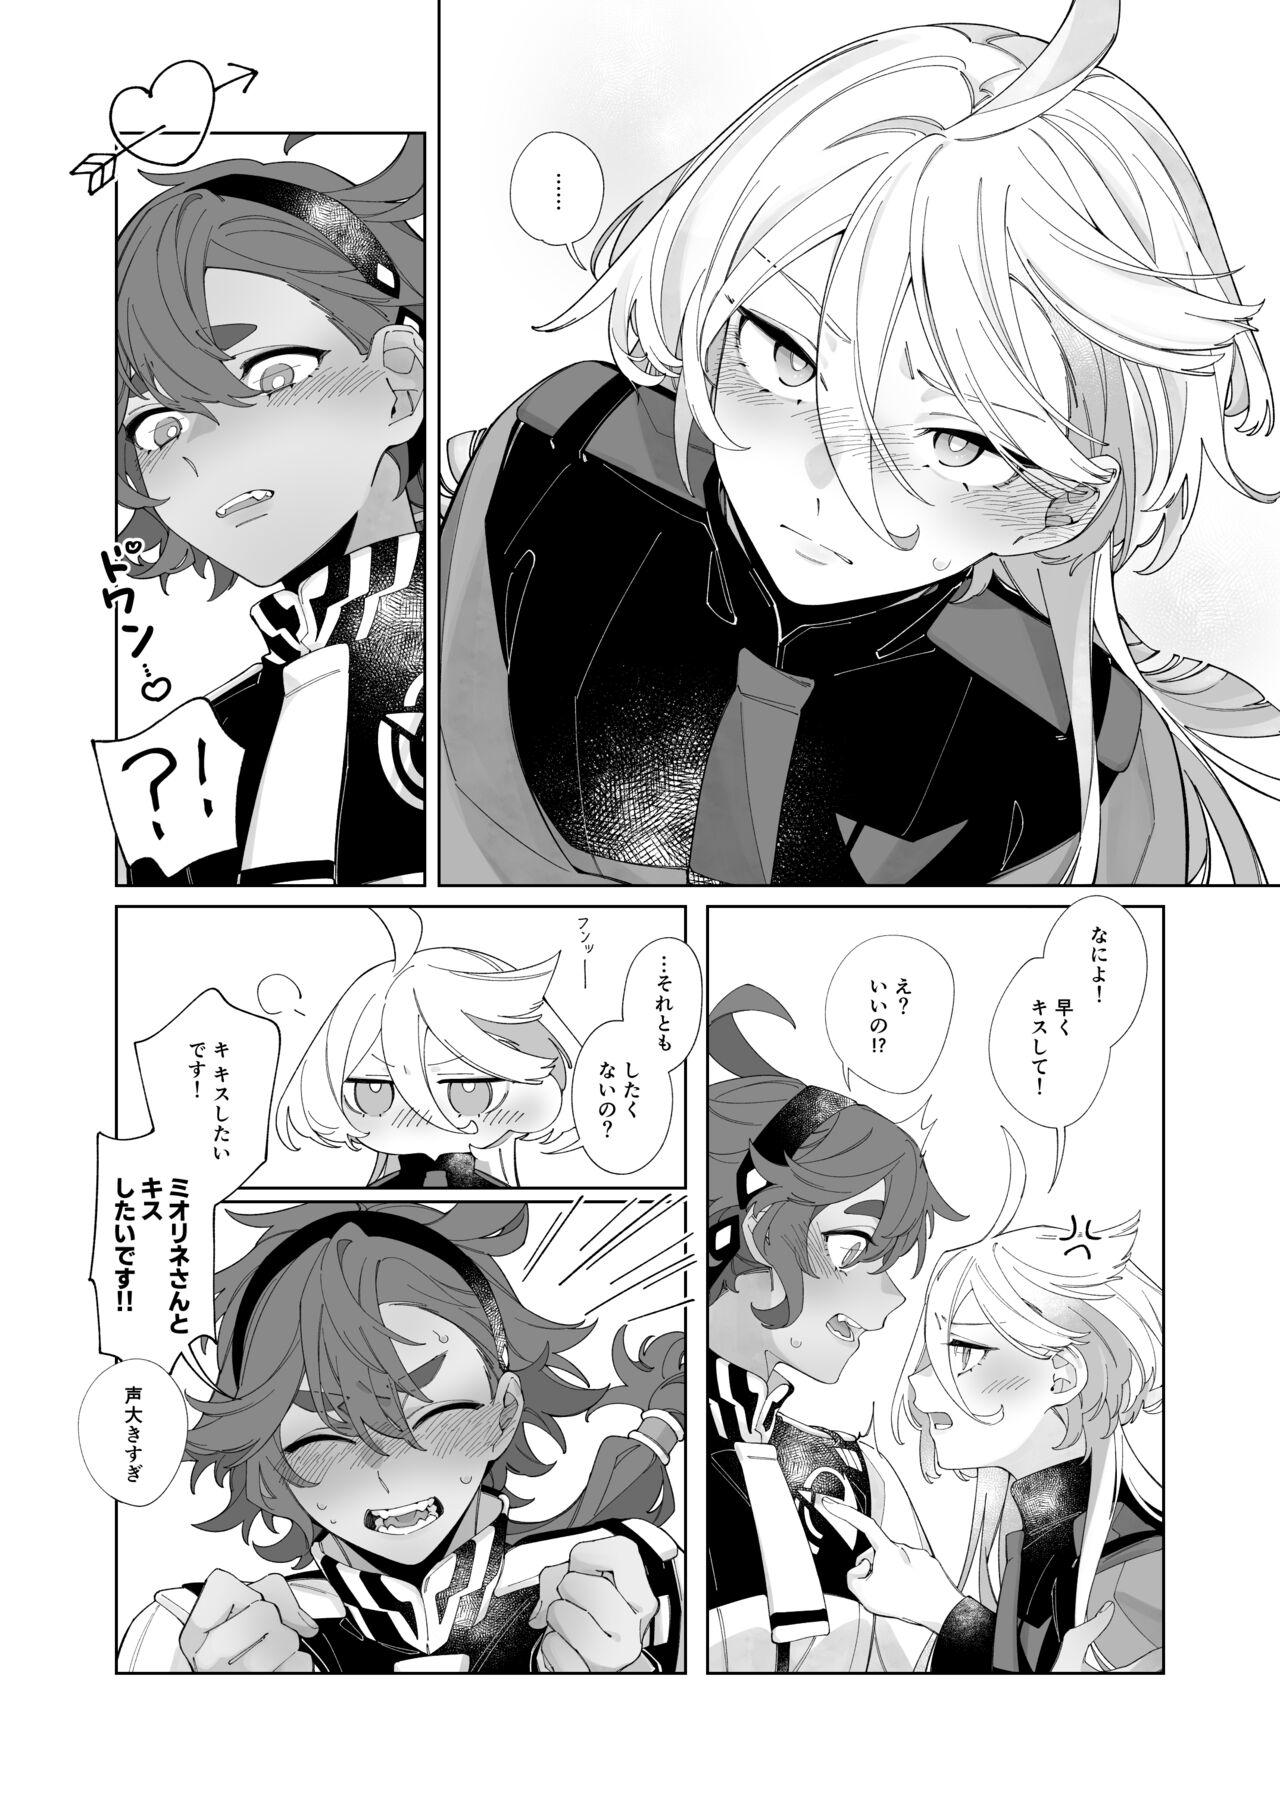 Banho Kiss no Ato Nani ga Shitai? - After kissing, what else do you want to do? - Mobile suit gundam the witch from mercury Thong - Page 6